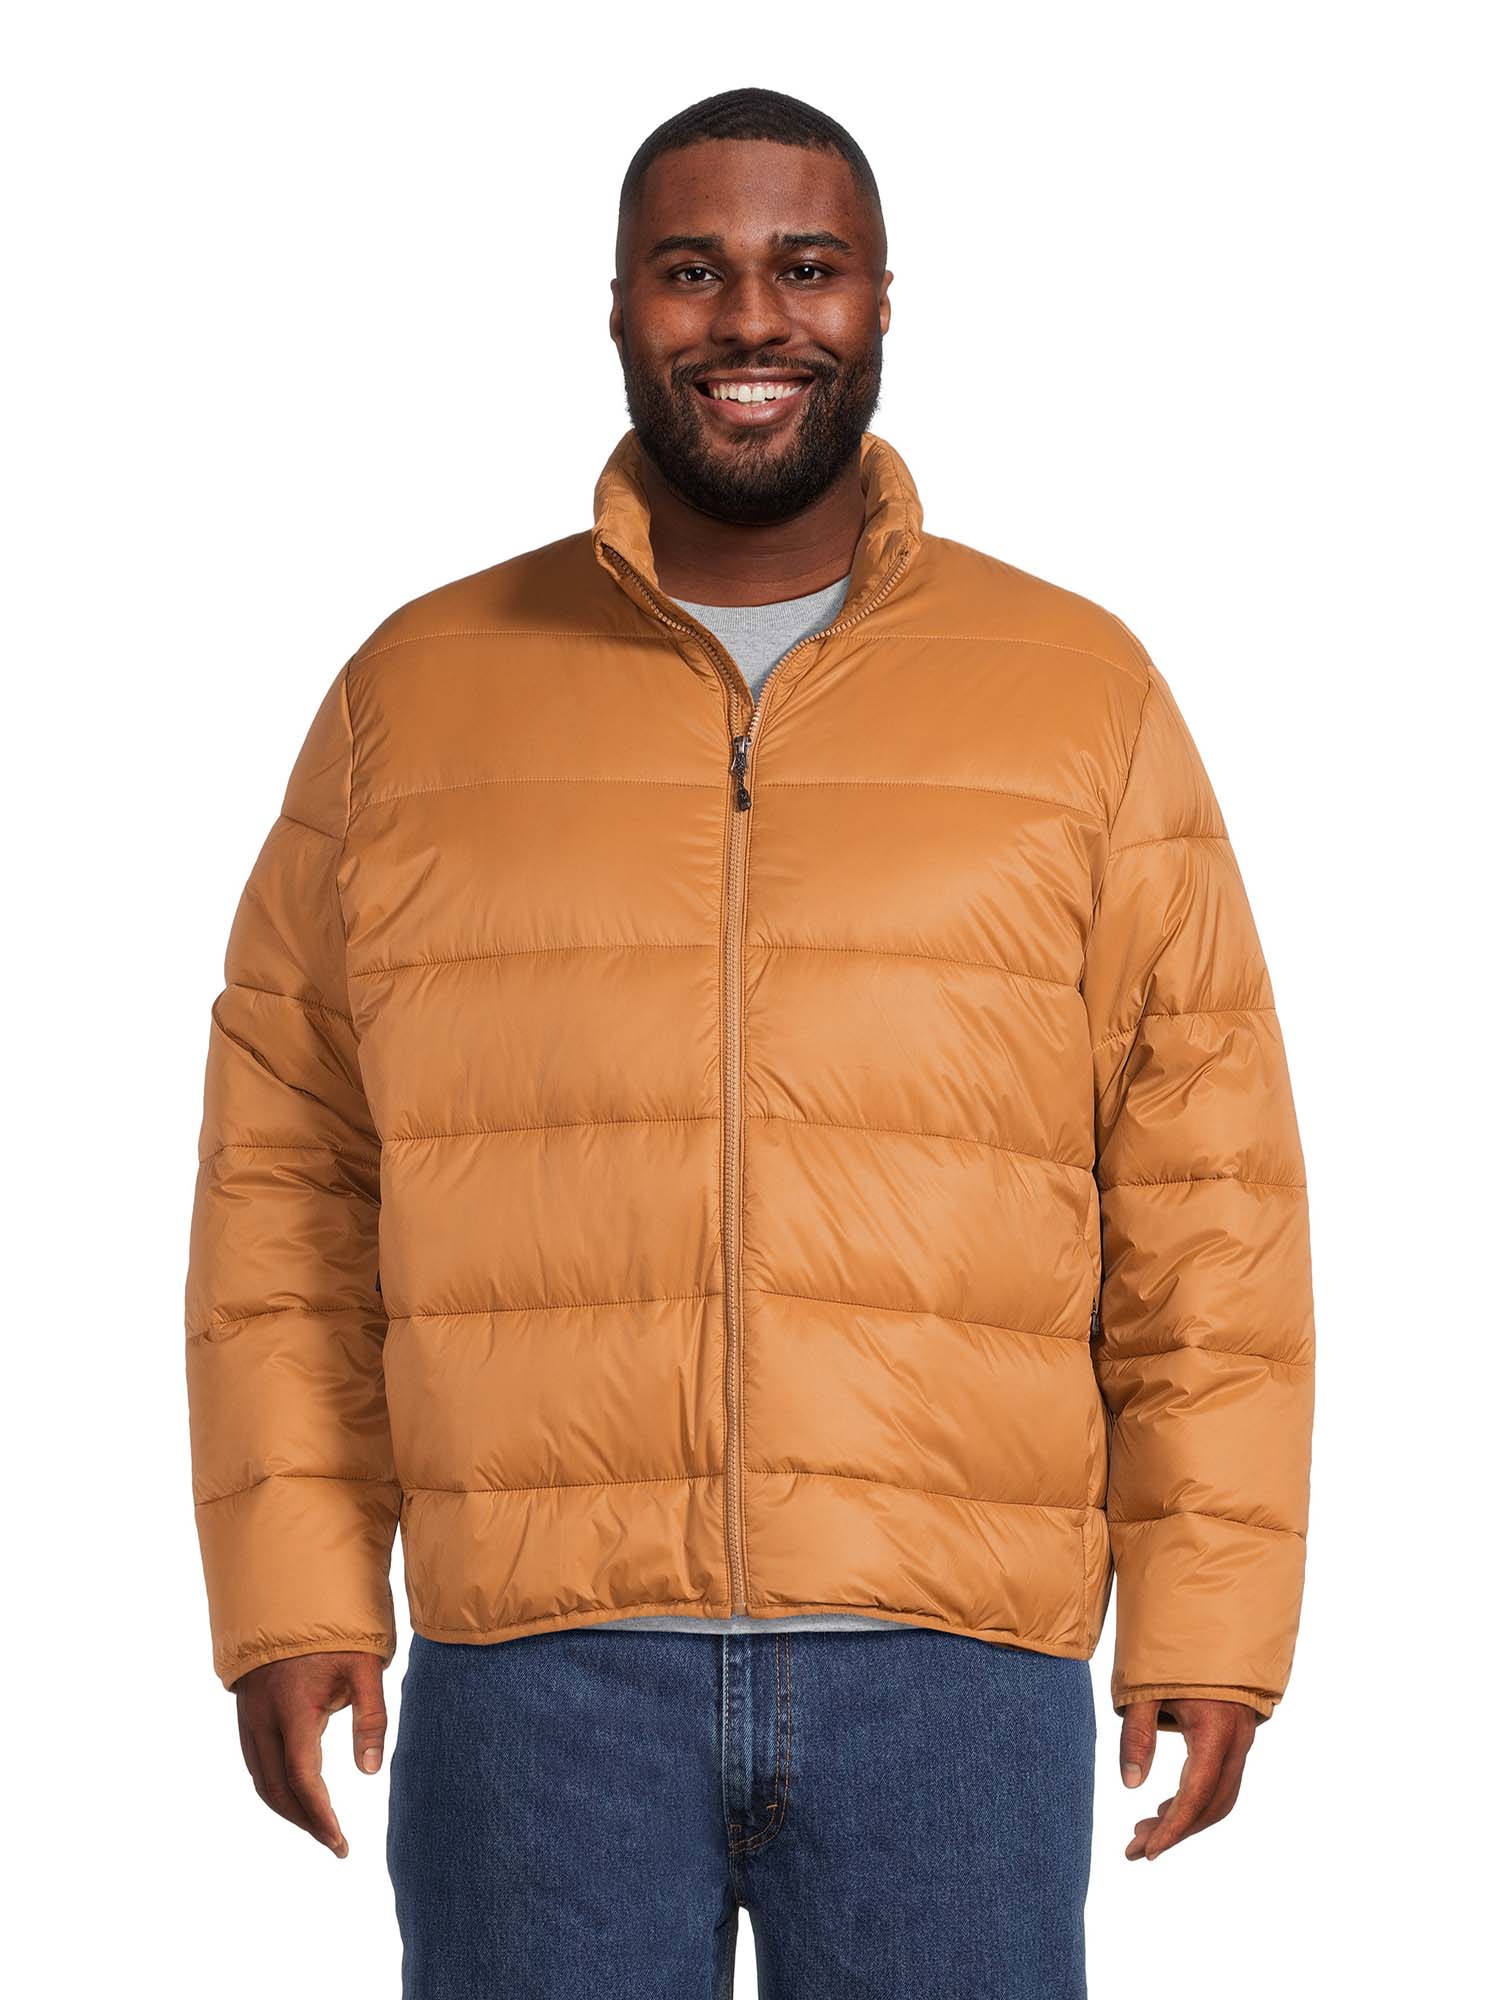 Swiss Tech Men's and Big Men's Packable Puffer Jacket, Sizes S-3XL - image 1 of 6